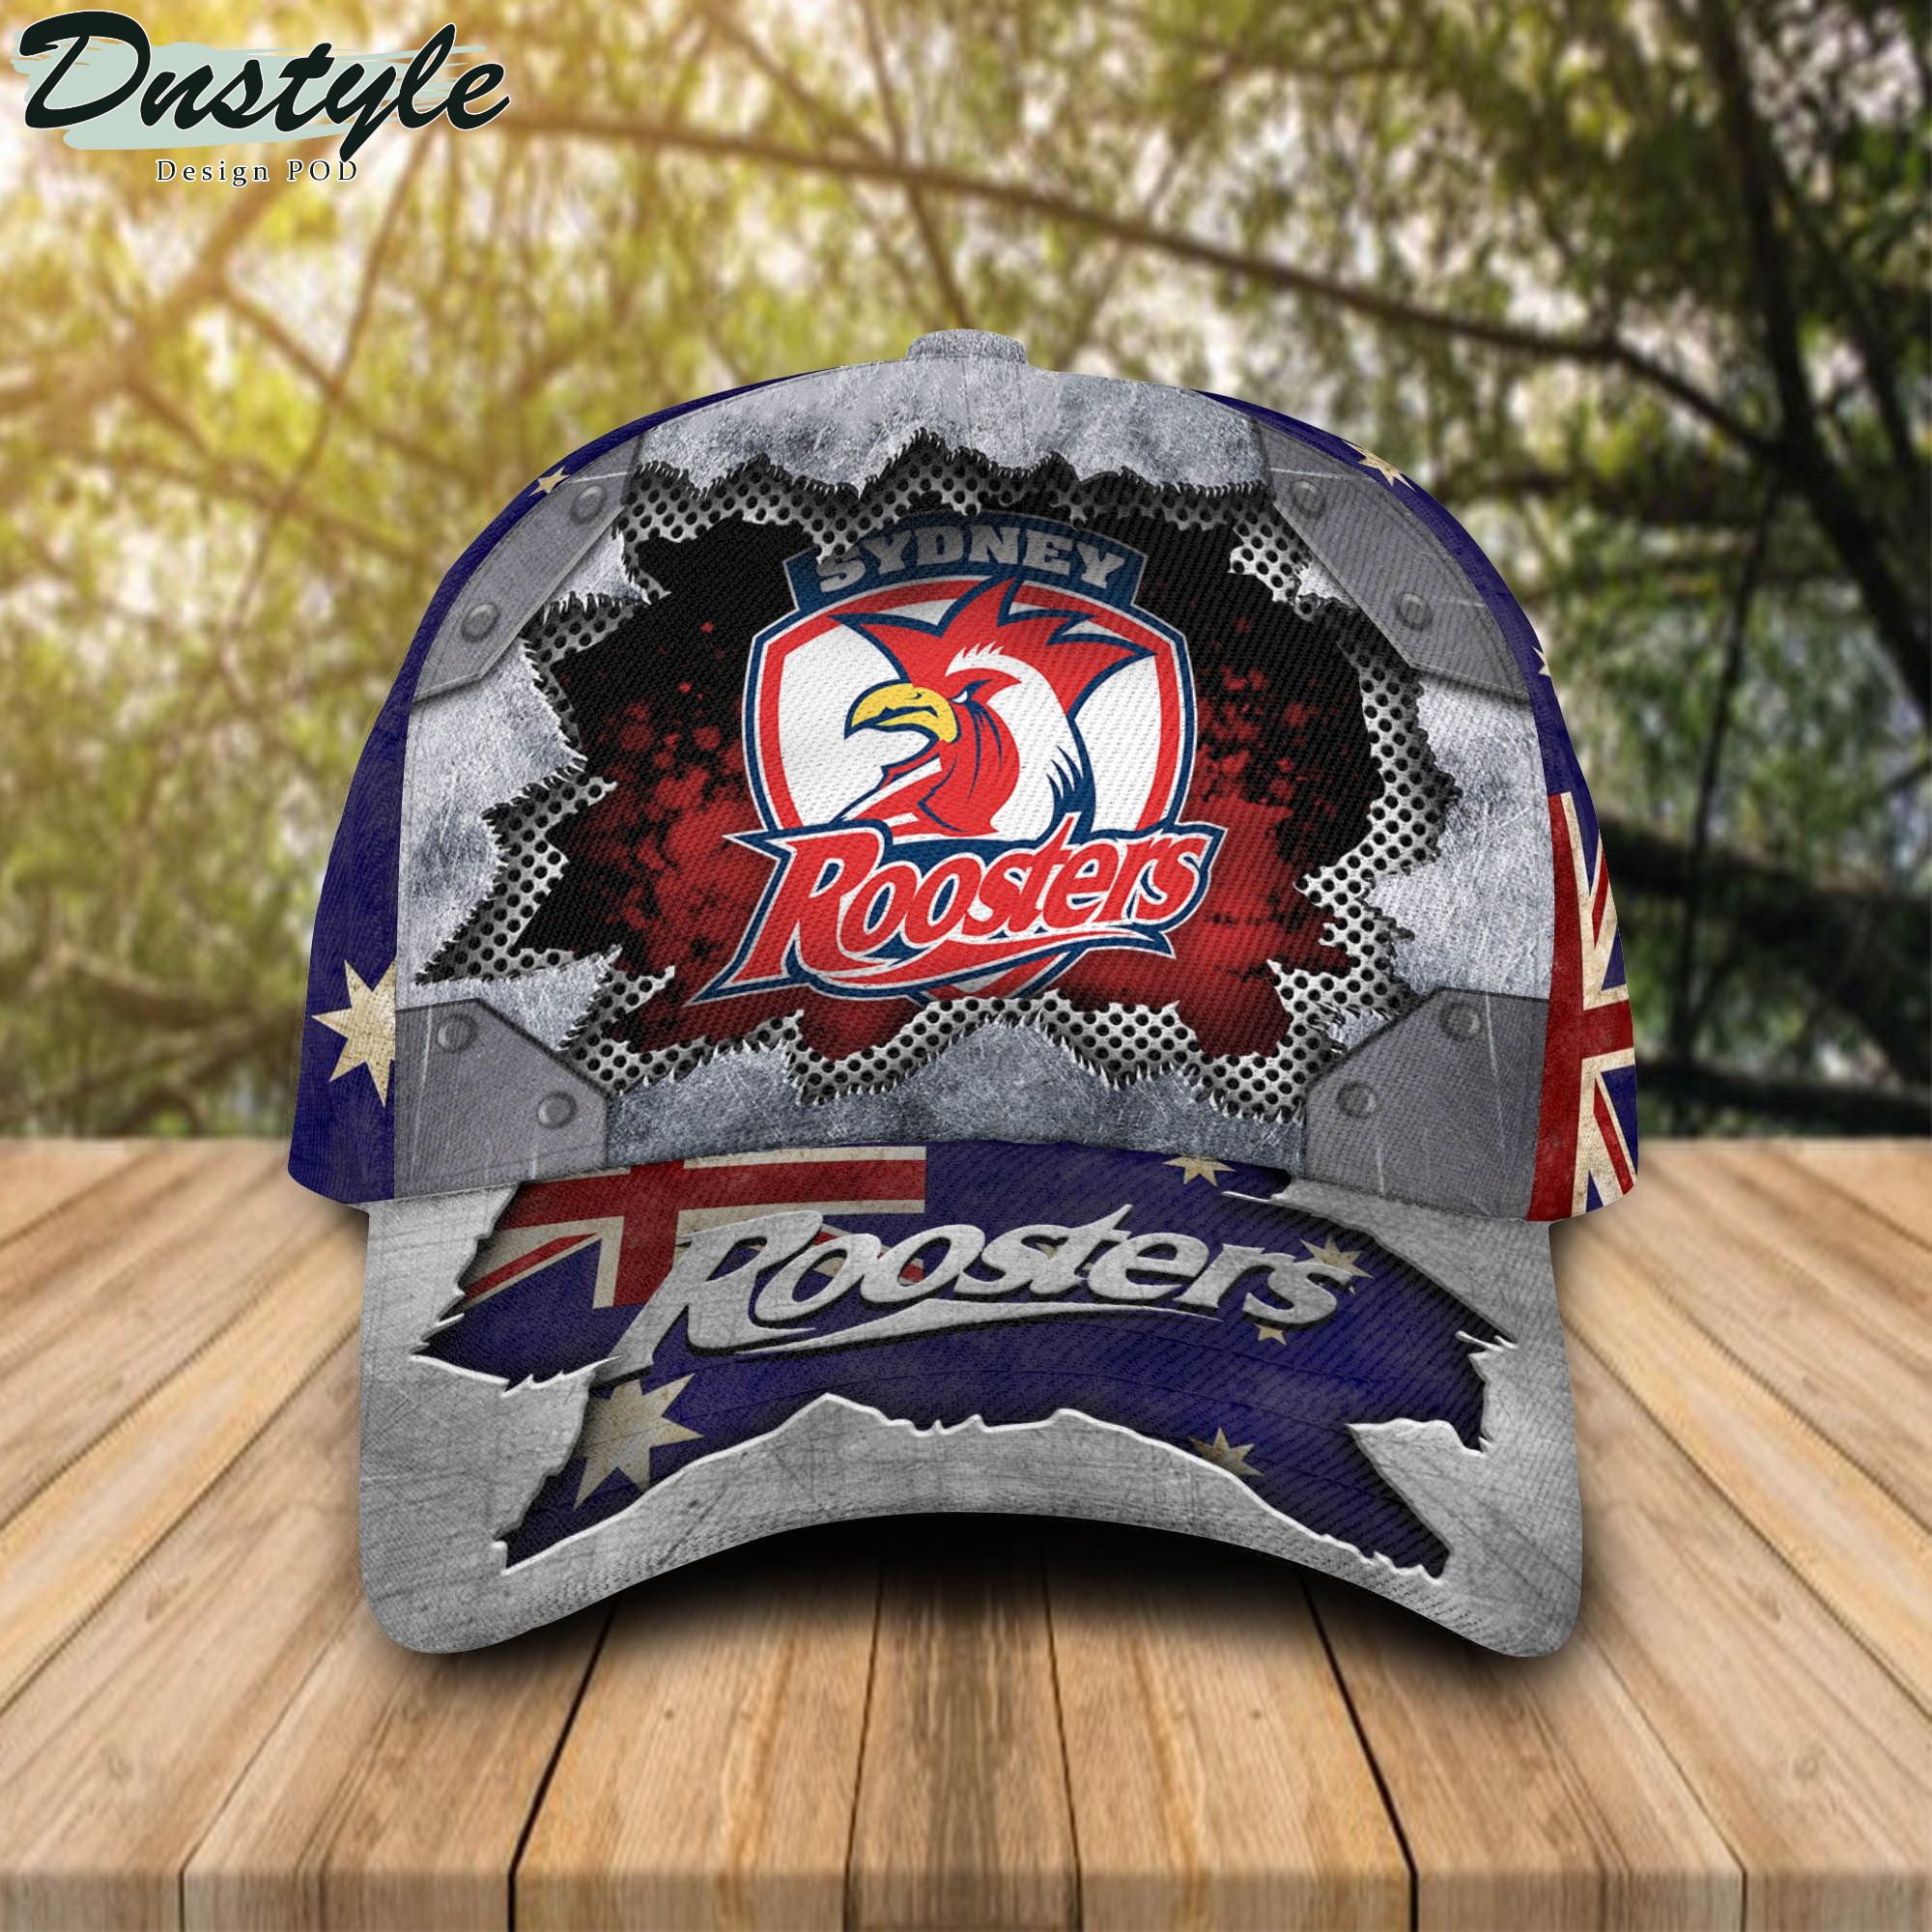 Sydney Roosters Classic Cap